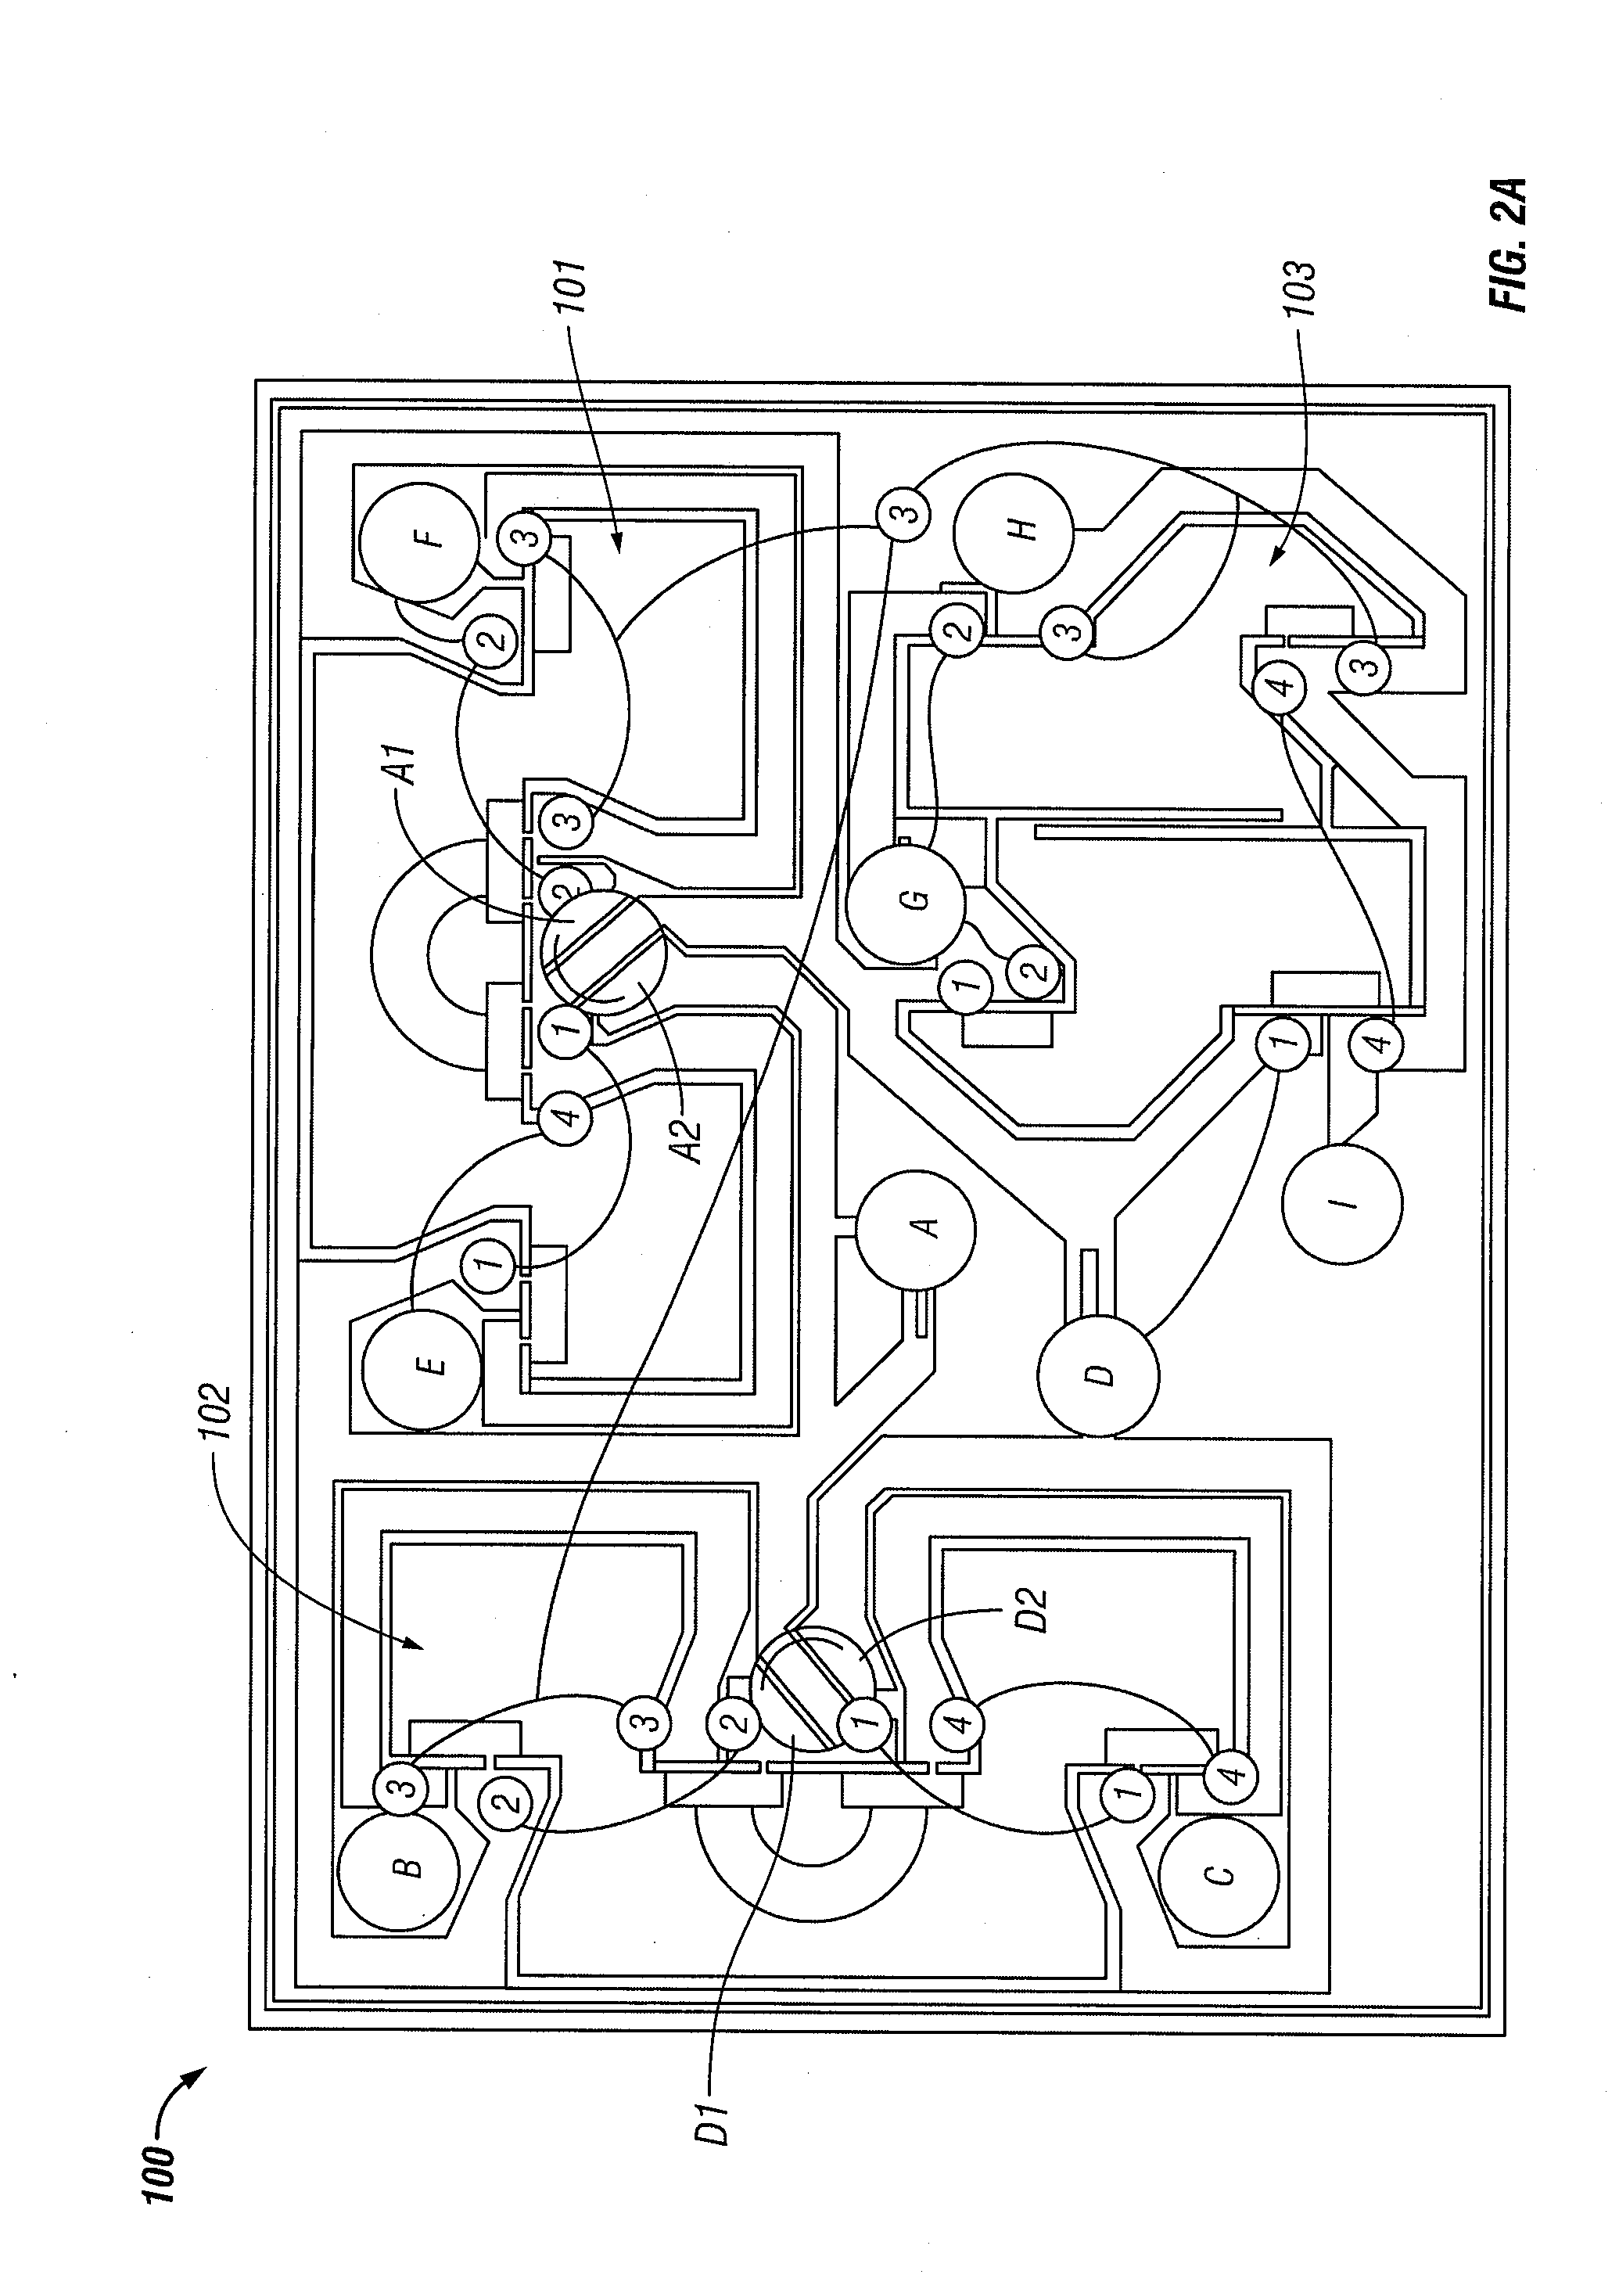 Interconnection system on a plane adjacent to a solid-state device structure